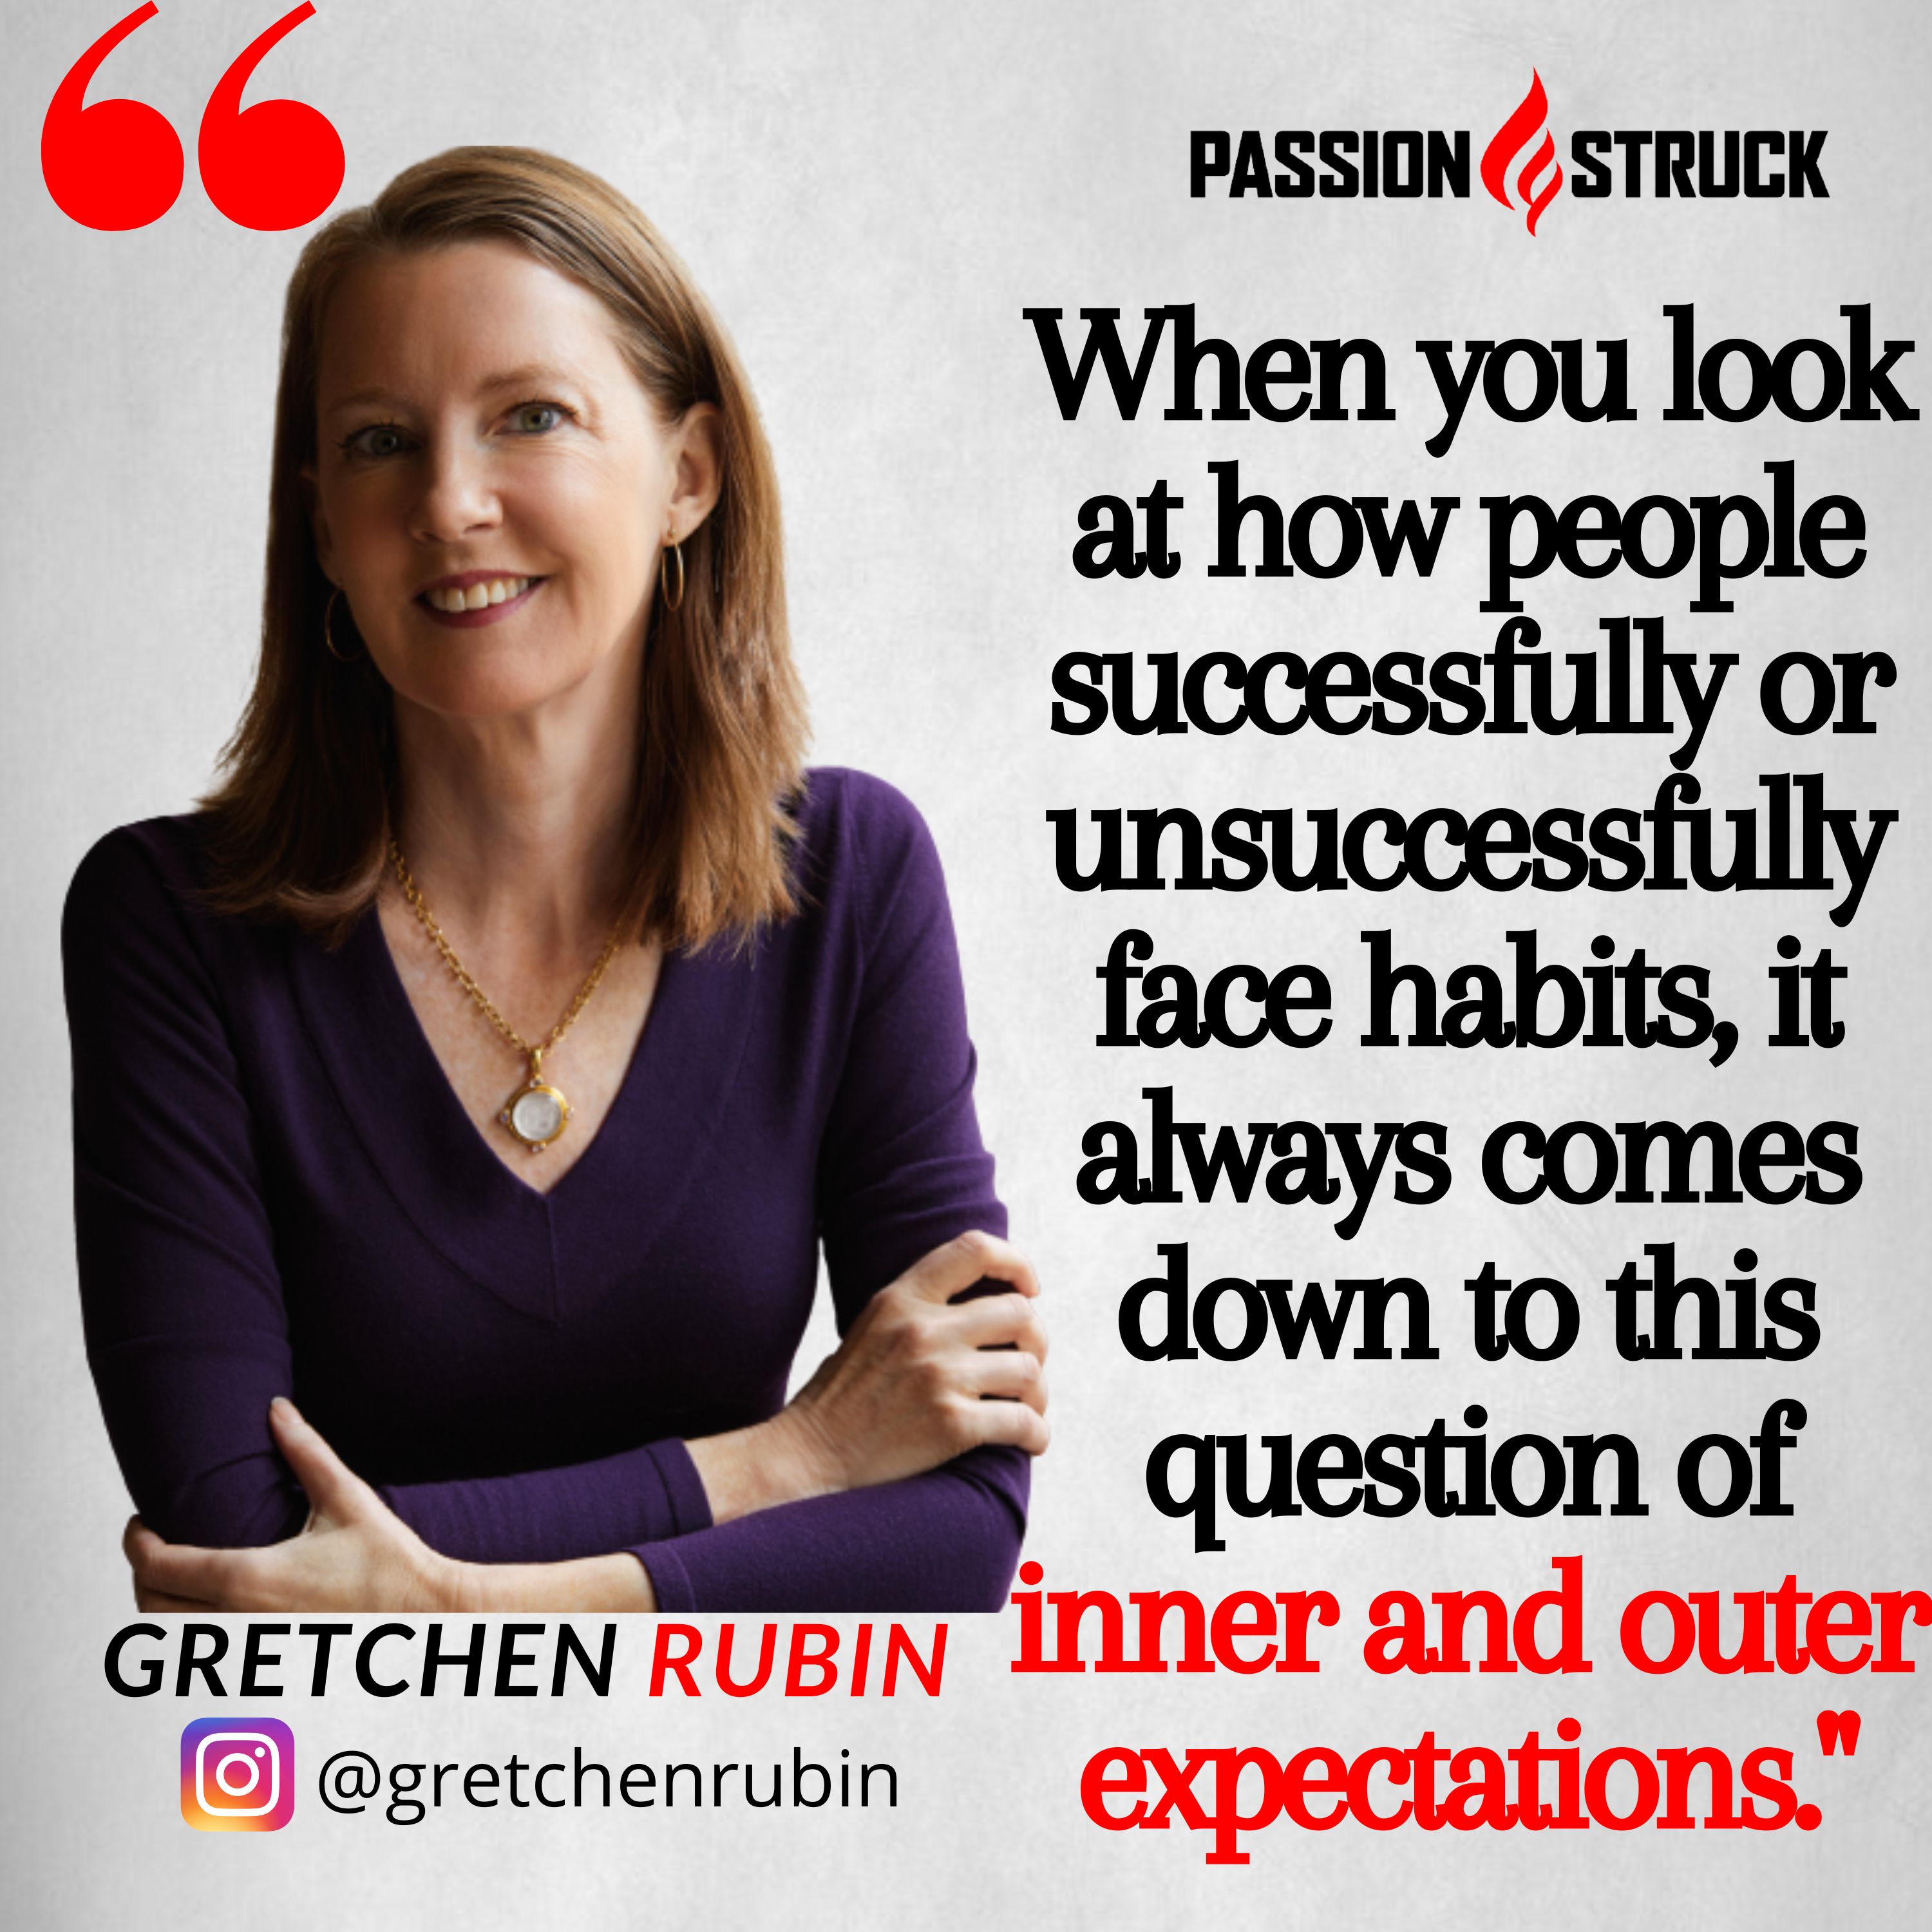 Gretchen Rubin quote on inner and outer expectations for Passion Struck